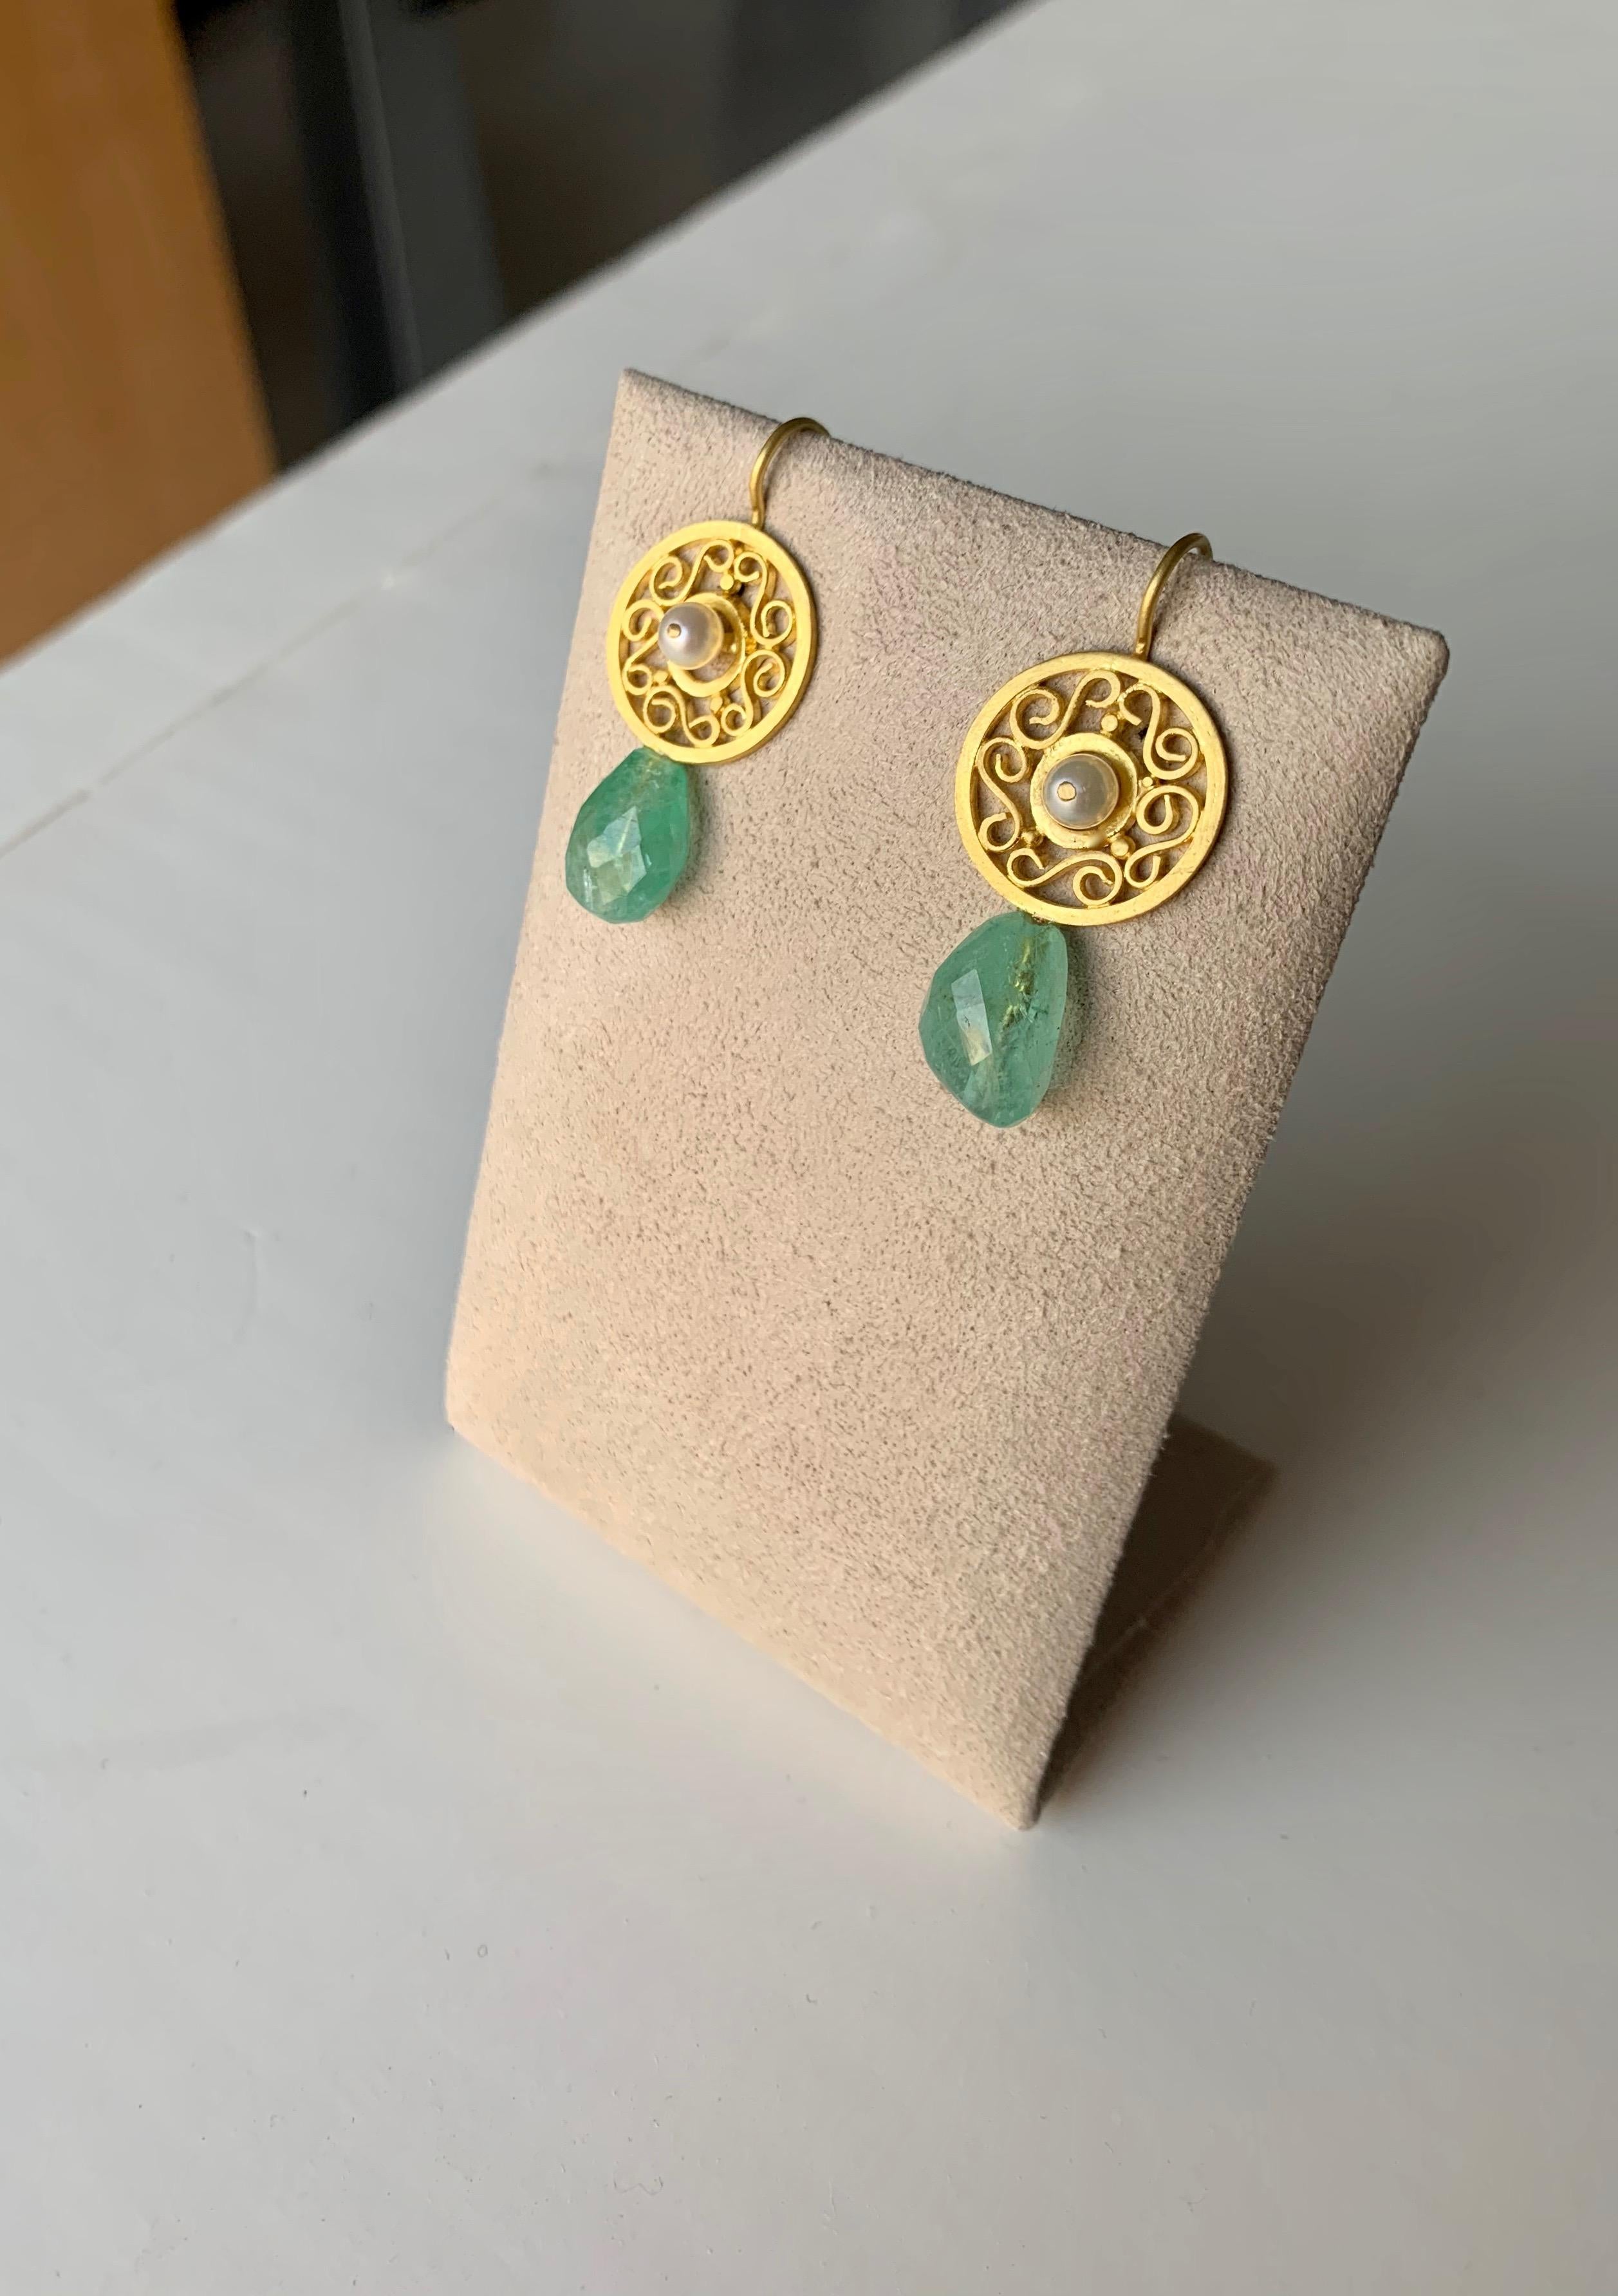 In the style of ancient Roman filigree jewelry, these ornamental earrings are adorned in 22K gold, 20K gold earwire, pearls, and ancient cut emeralds beads 9.45 carats. Entirely made by hand in New York City. 